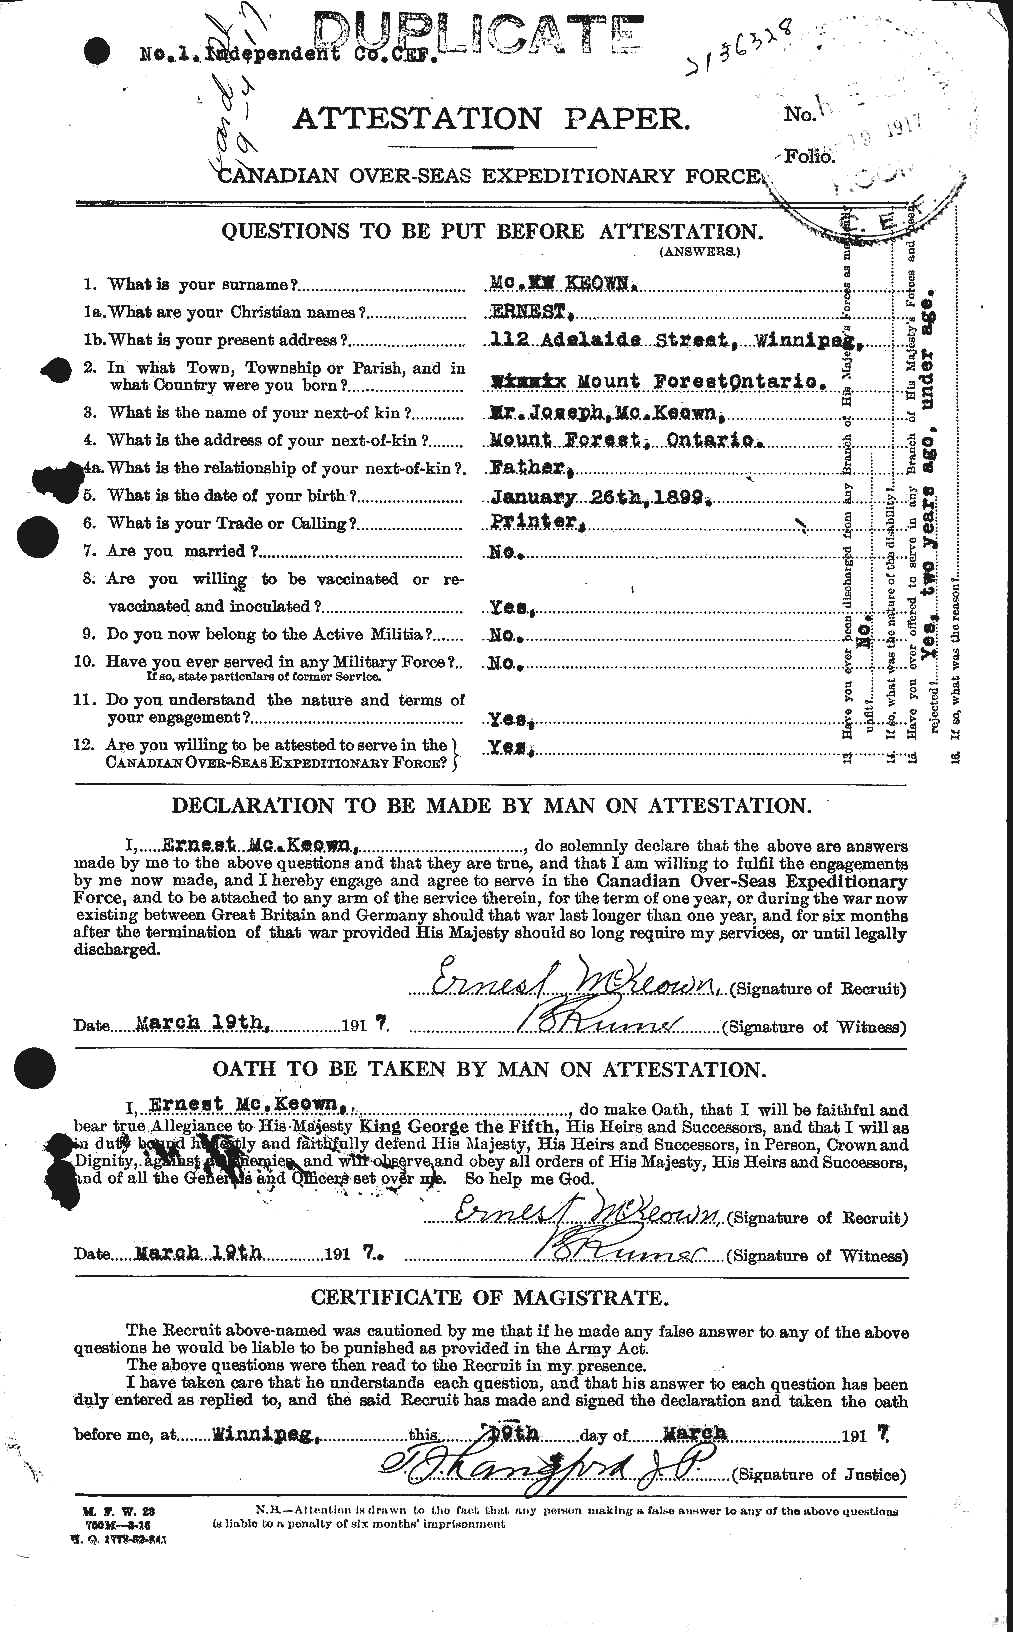 Personnel Records of the First World War - CEF 532066a